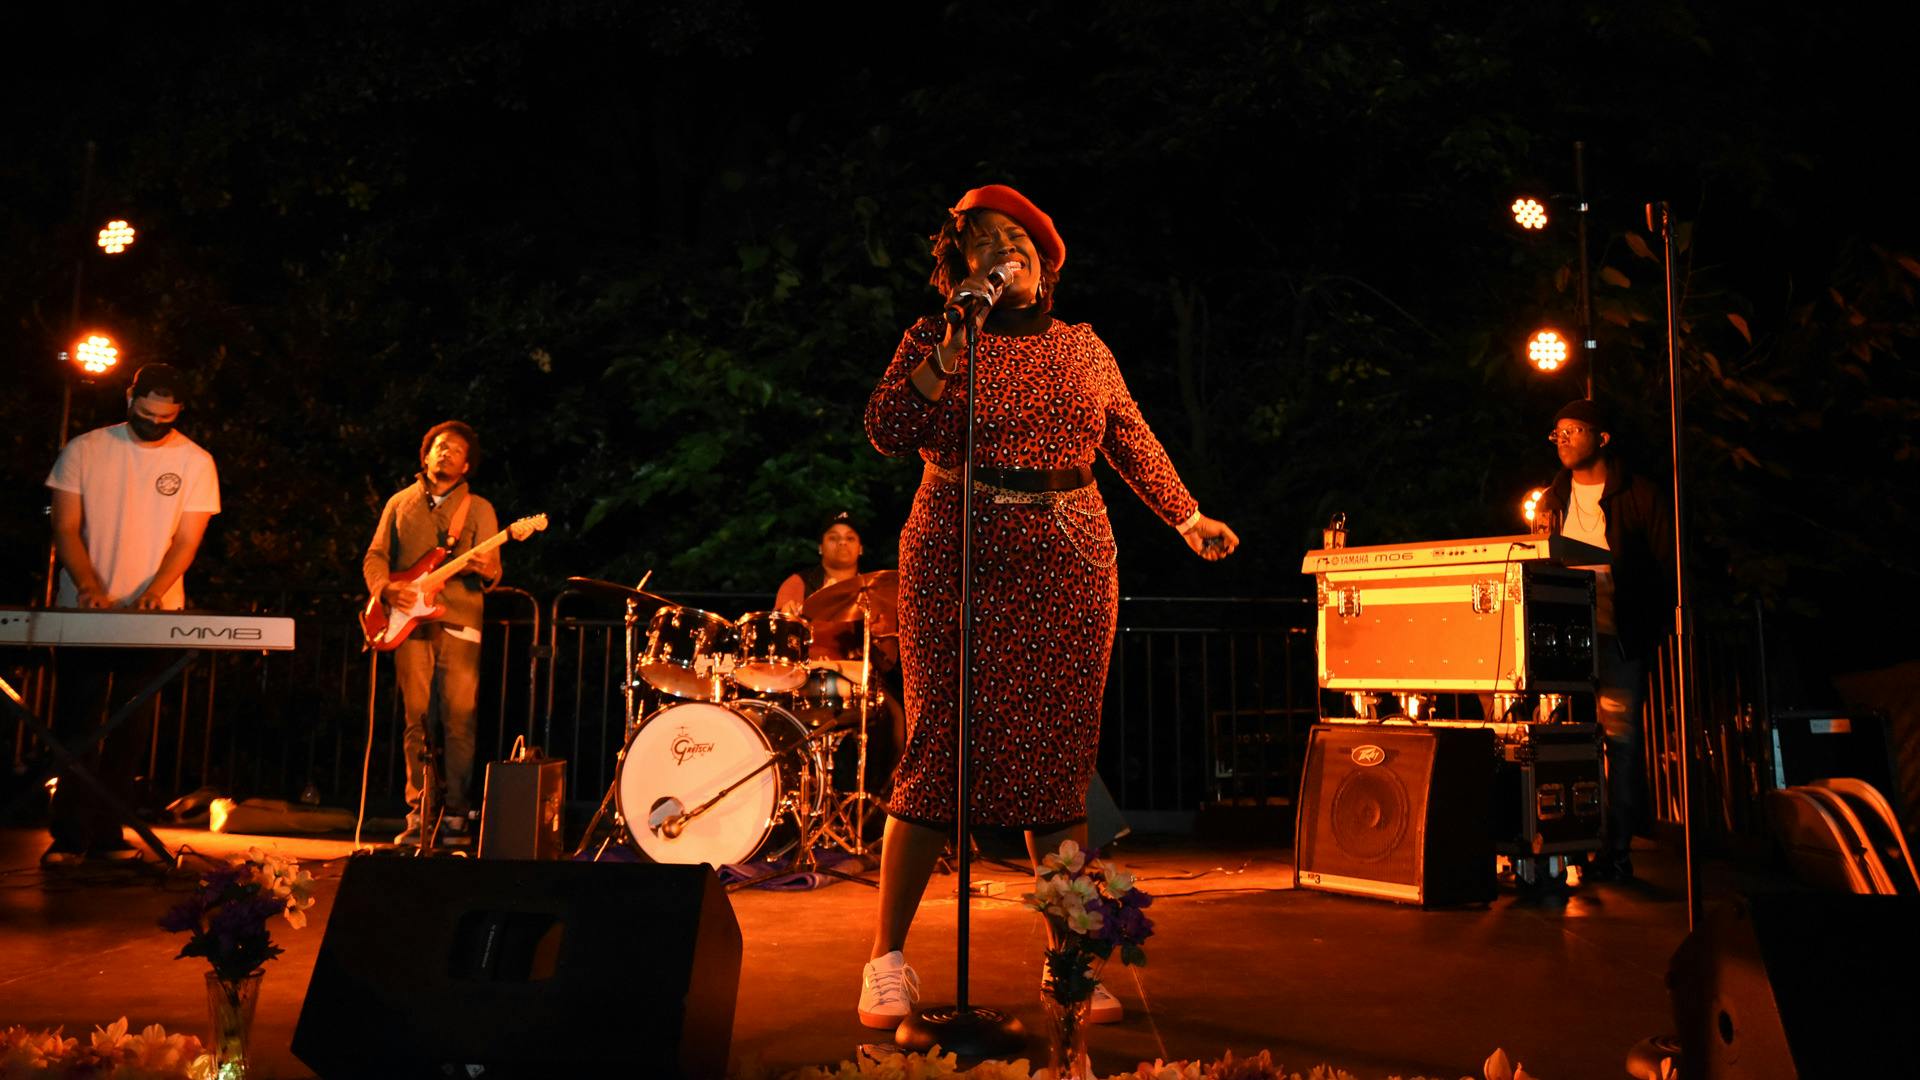 A woman stands in front of a live band and sings.